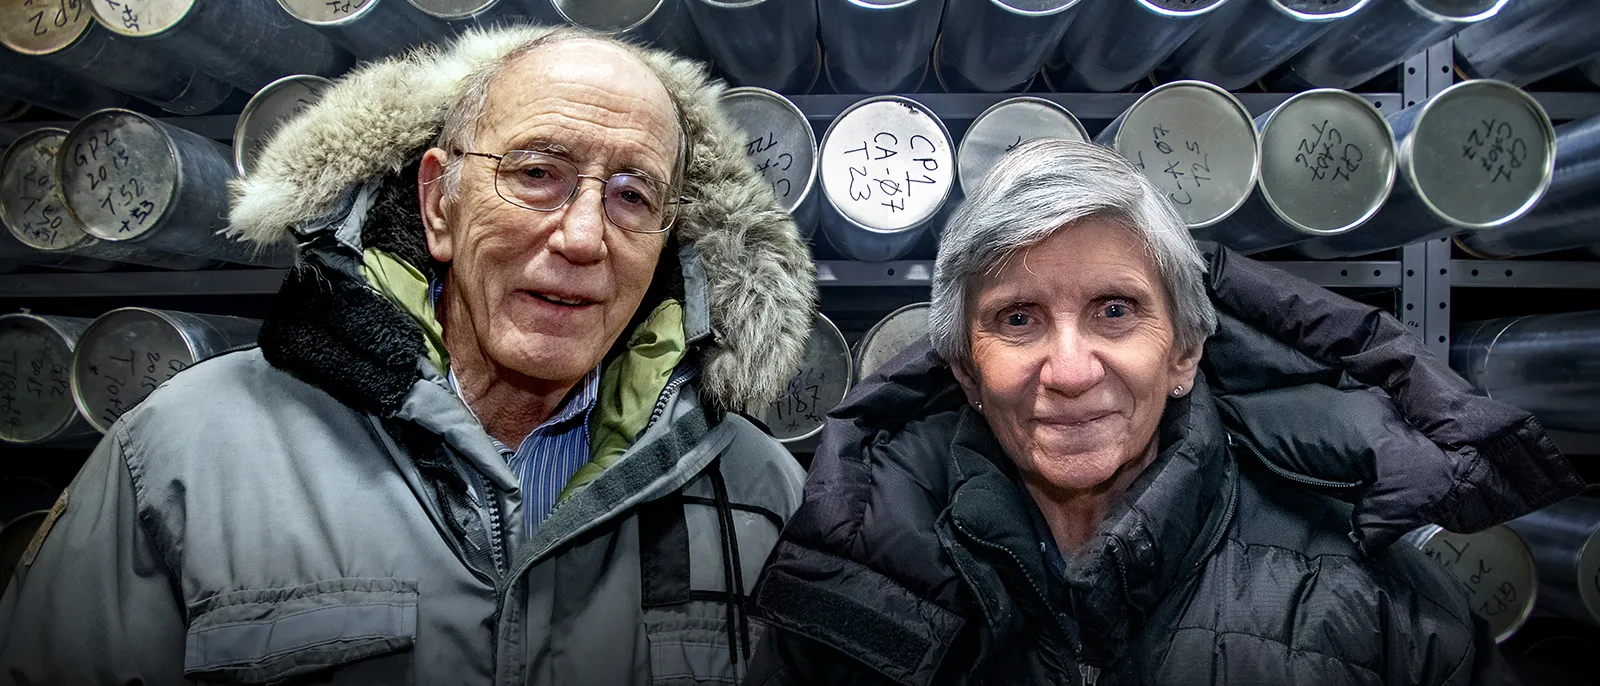 Lonnie Thompson and Ellen Mosley-Thompson in ice core freezer